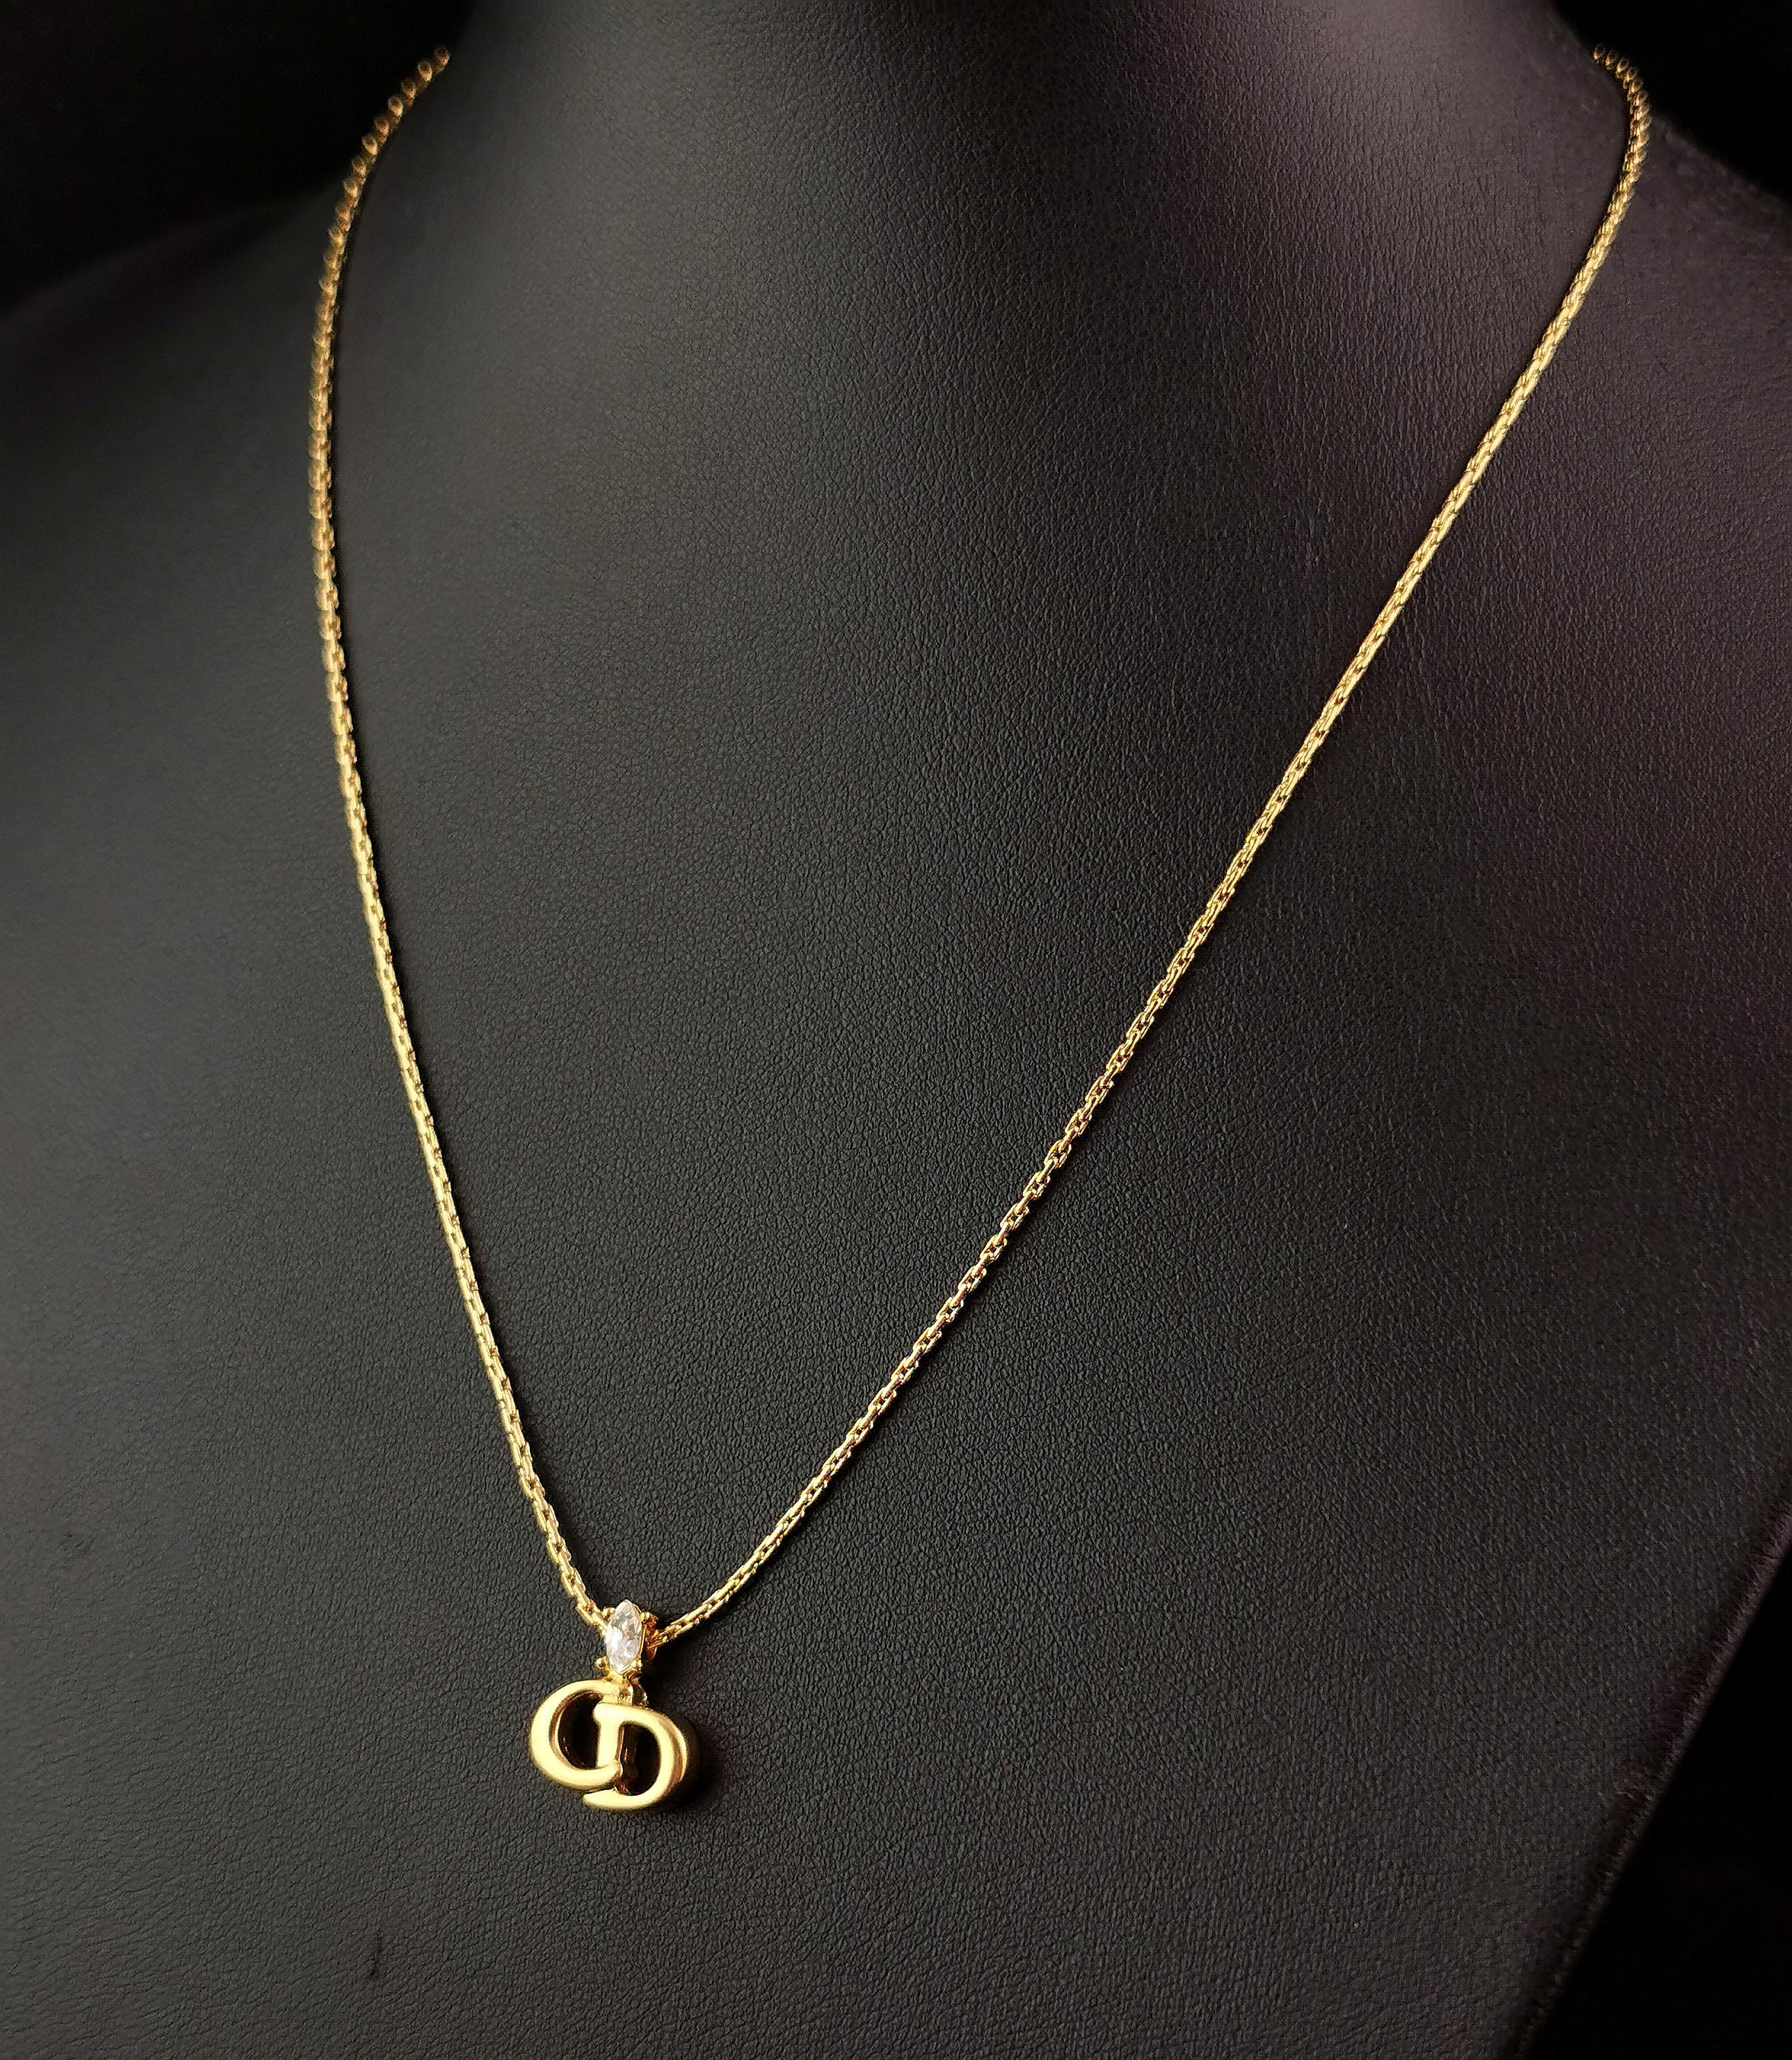 Vintage Christian Dior logo pendant necklace, gold plated, Diamante  For Sale 6